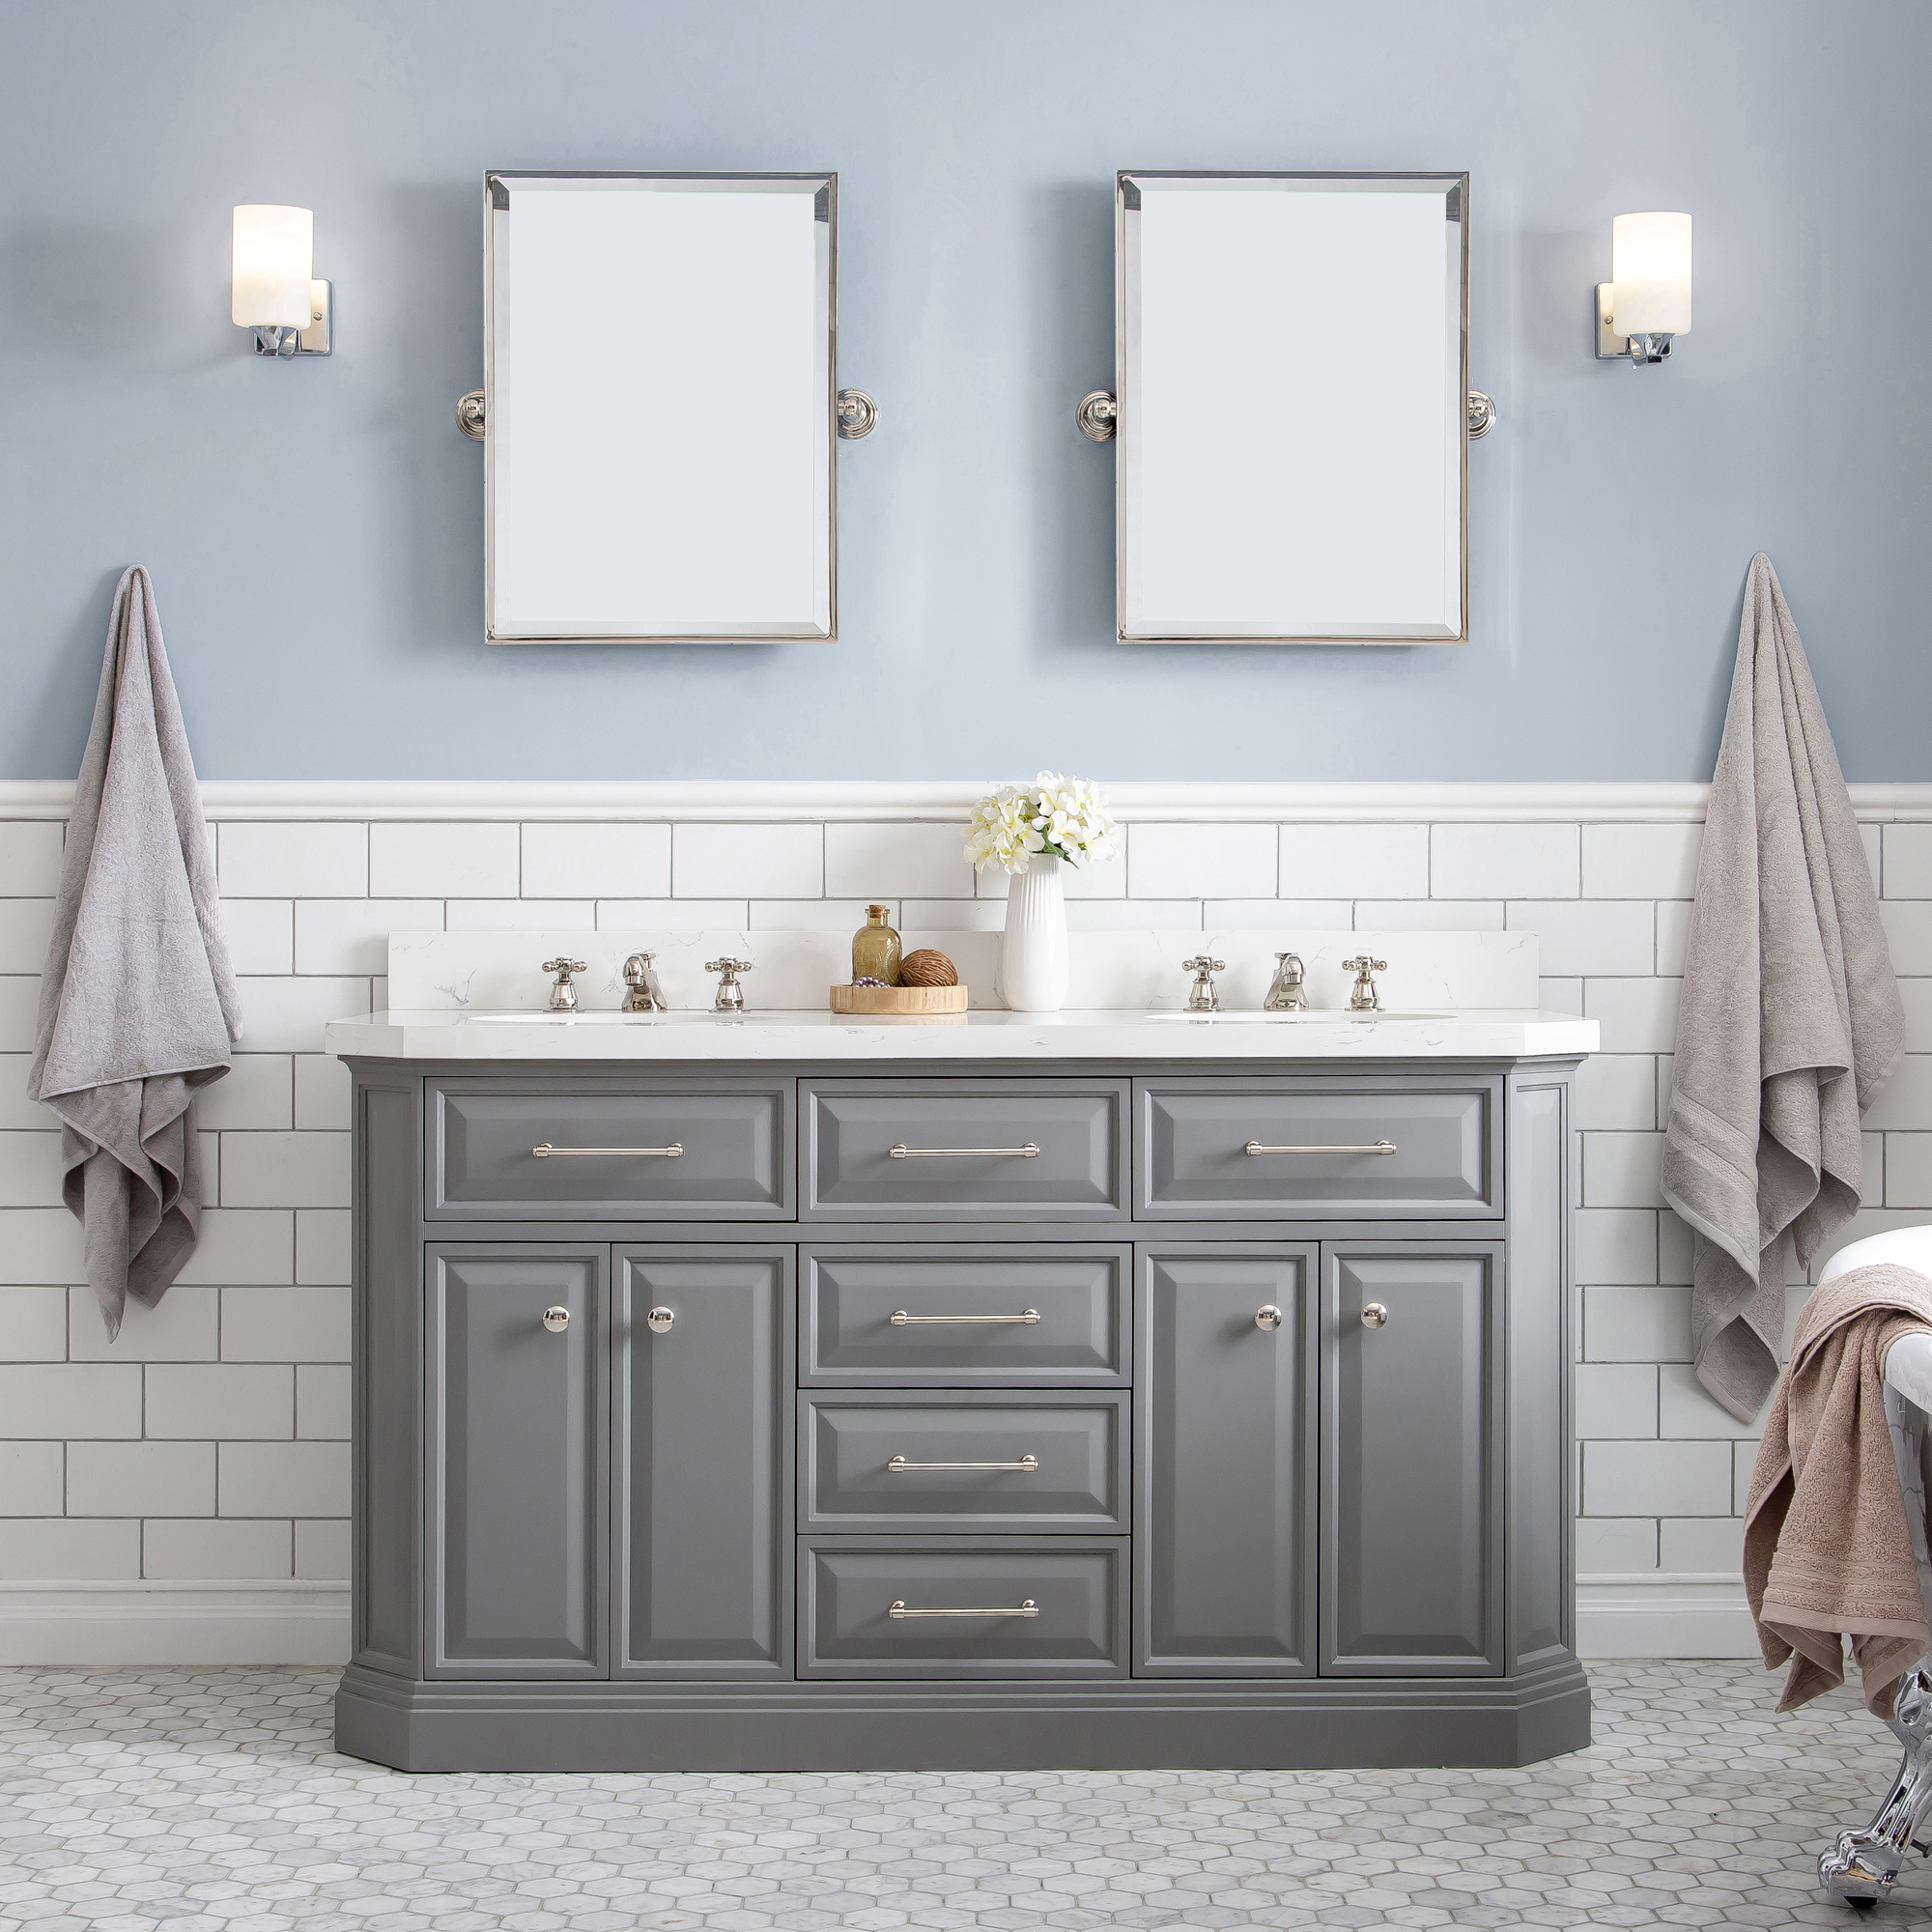 60" Traditional Collection Quartz Carrara Cashmere Grey Bathroom Vanity Set With Hardware in Polished Nickel (PVD) Finish